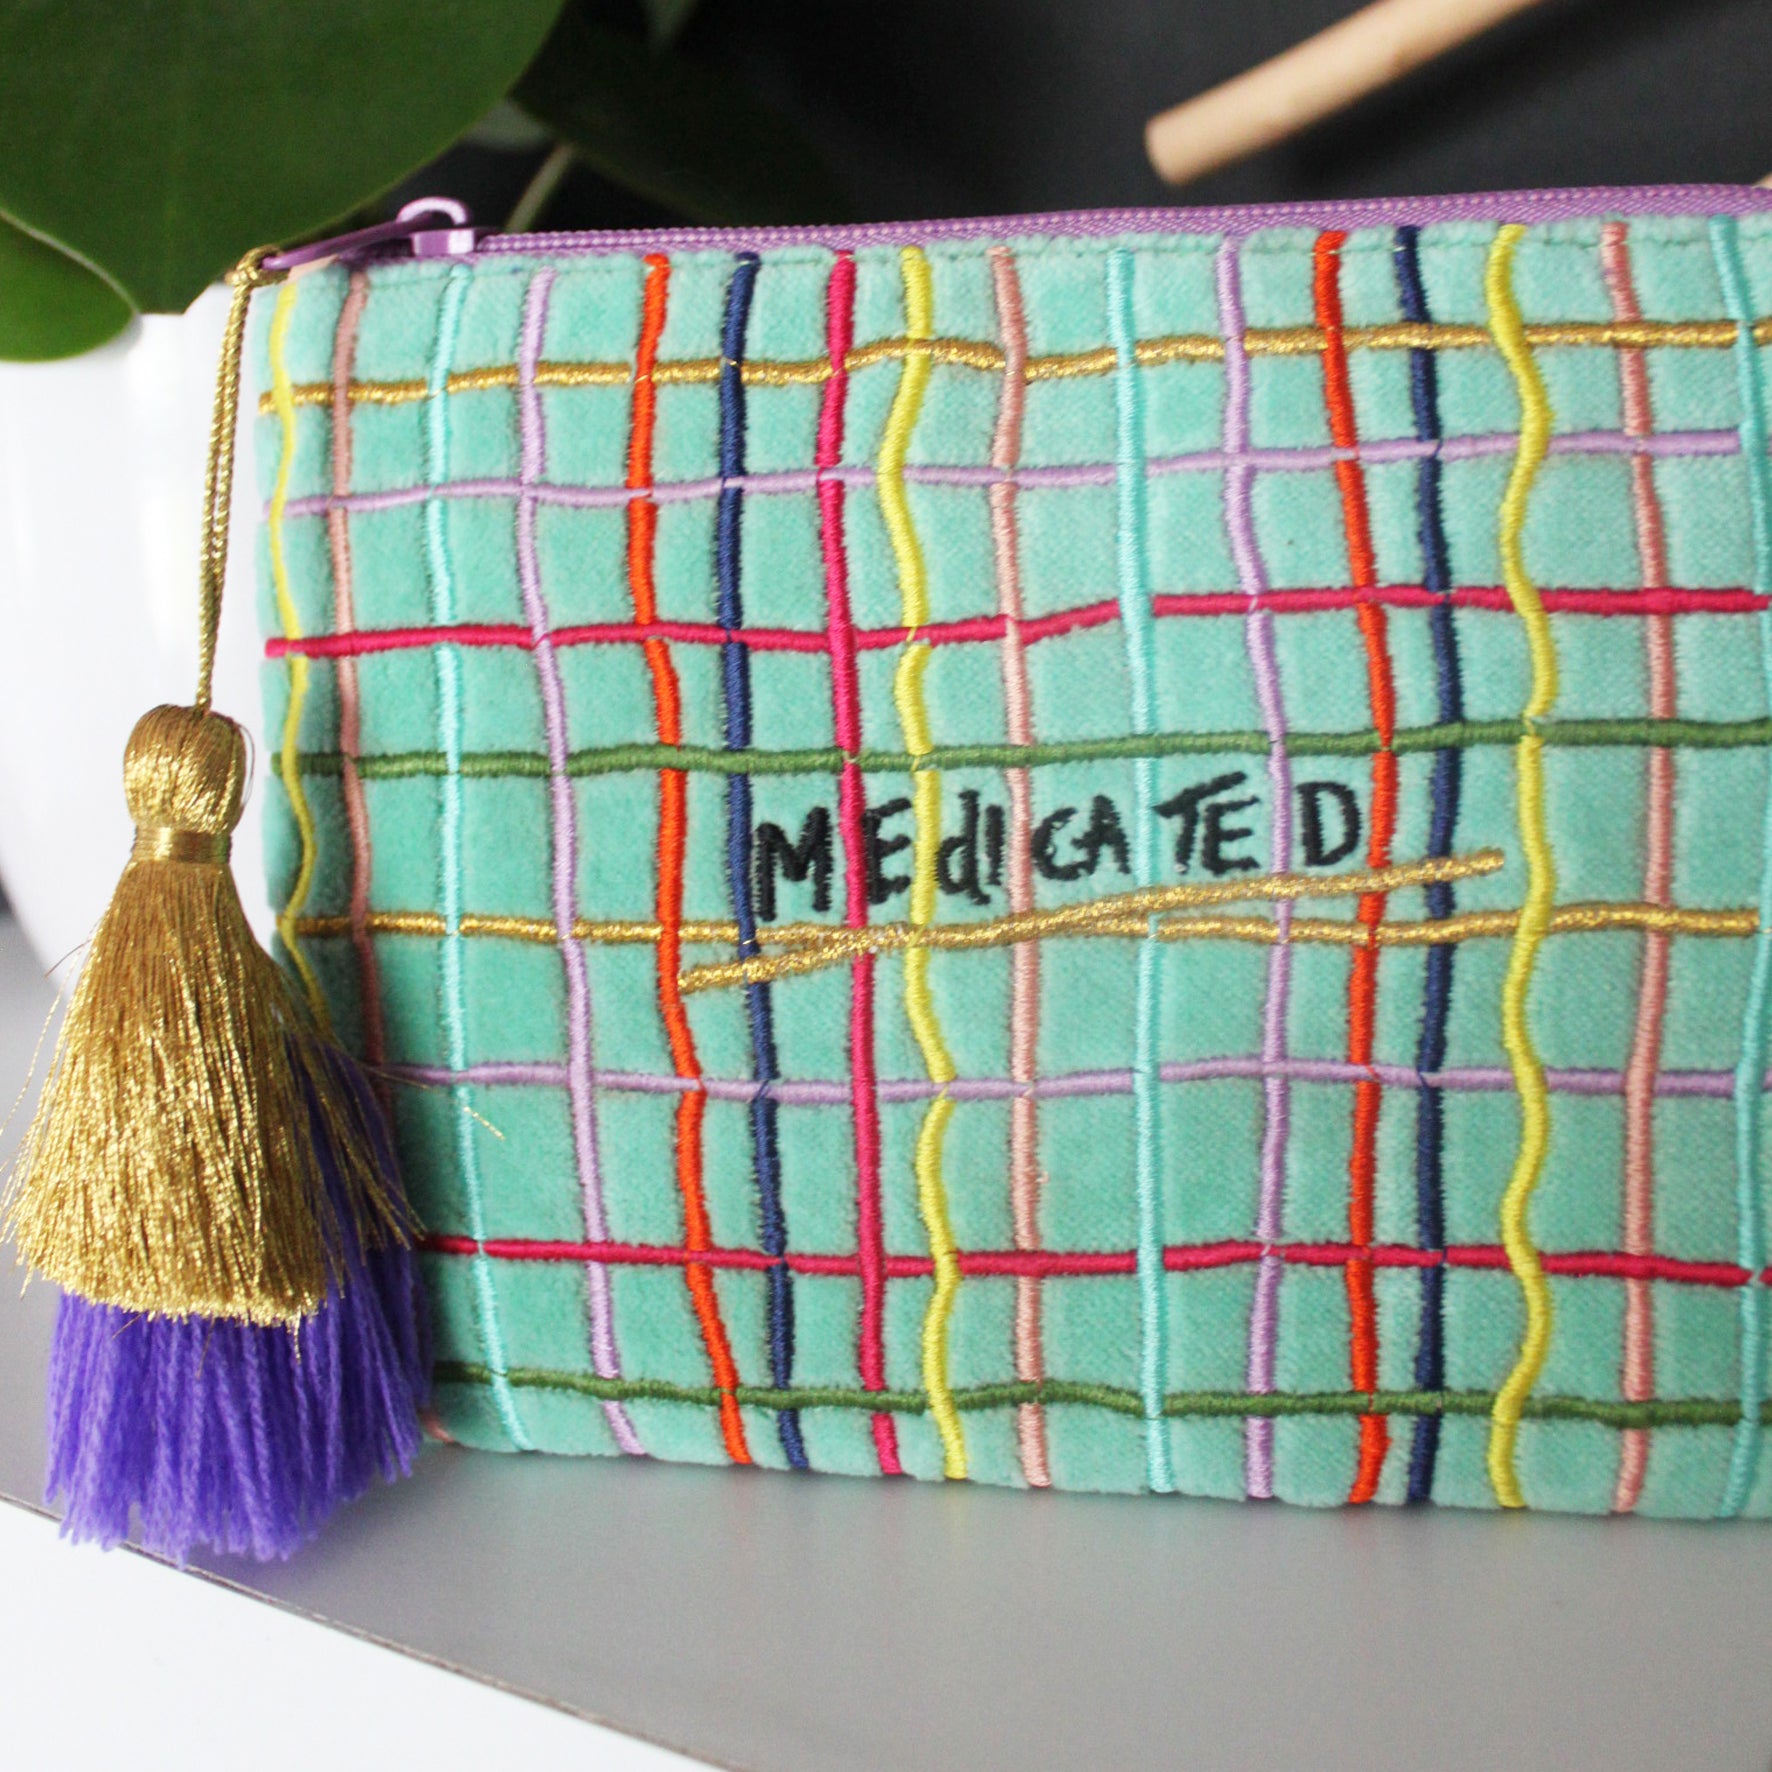 Small Talk Purse 'Medicated, Motivated'